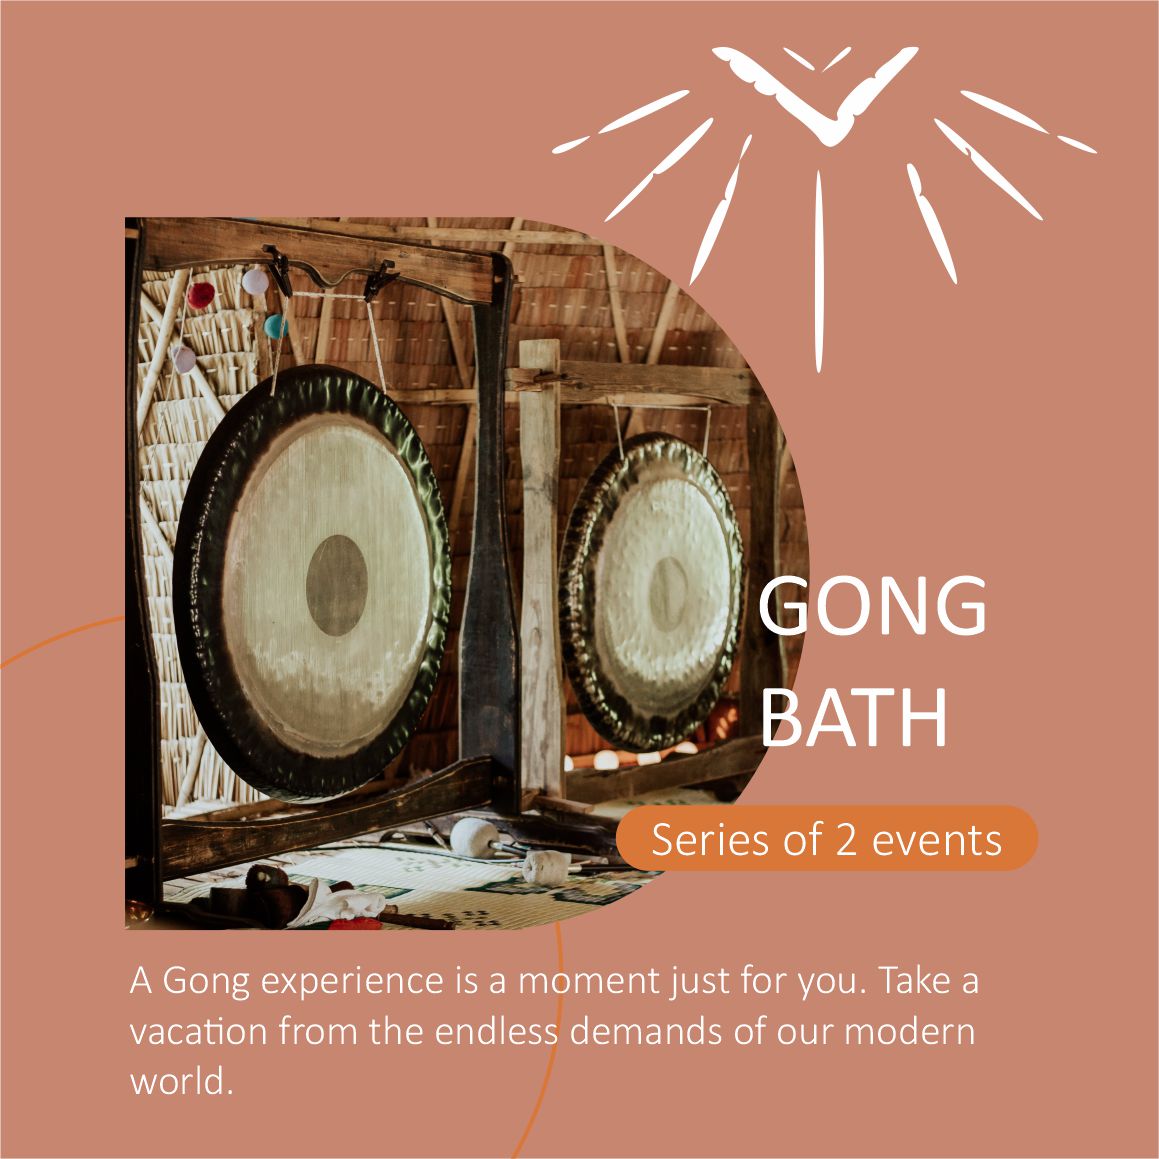 Gong Bath - With Alicia - Monday evenings - April 15th and 29th